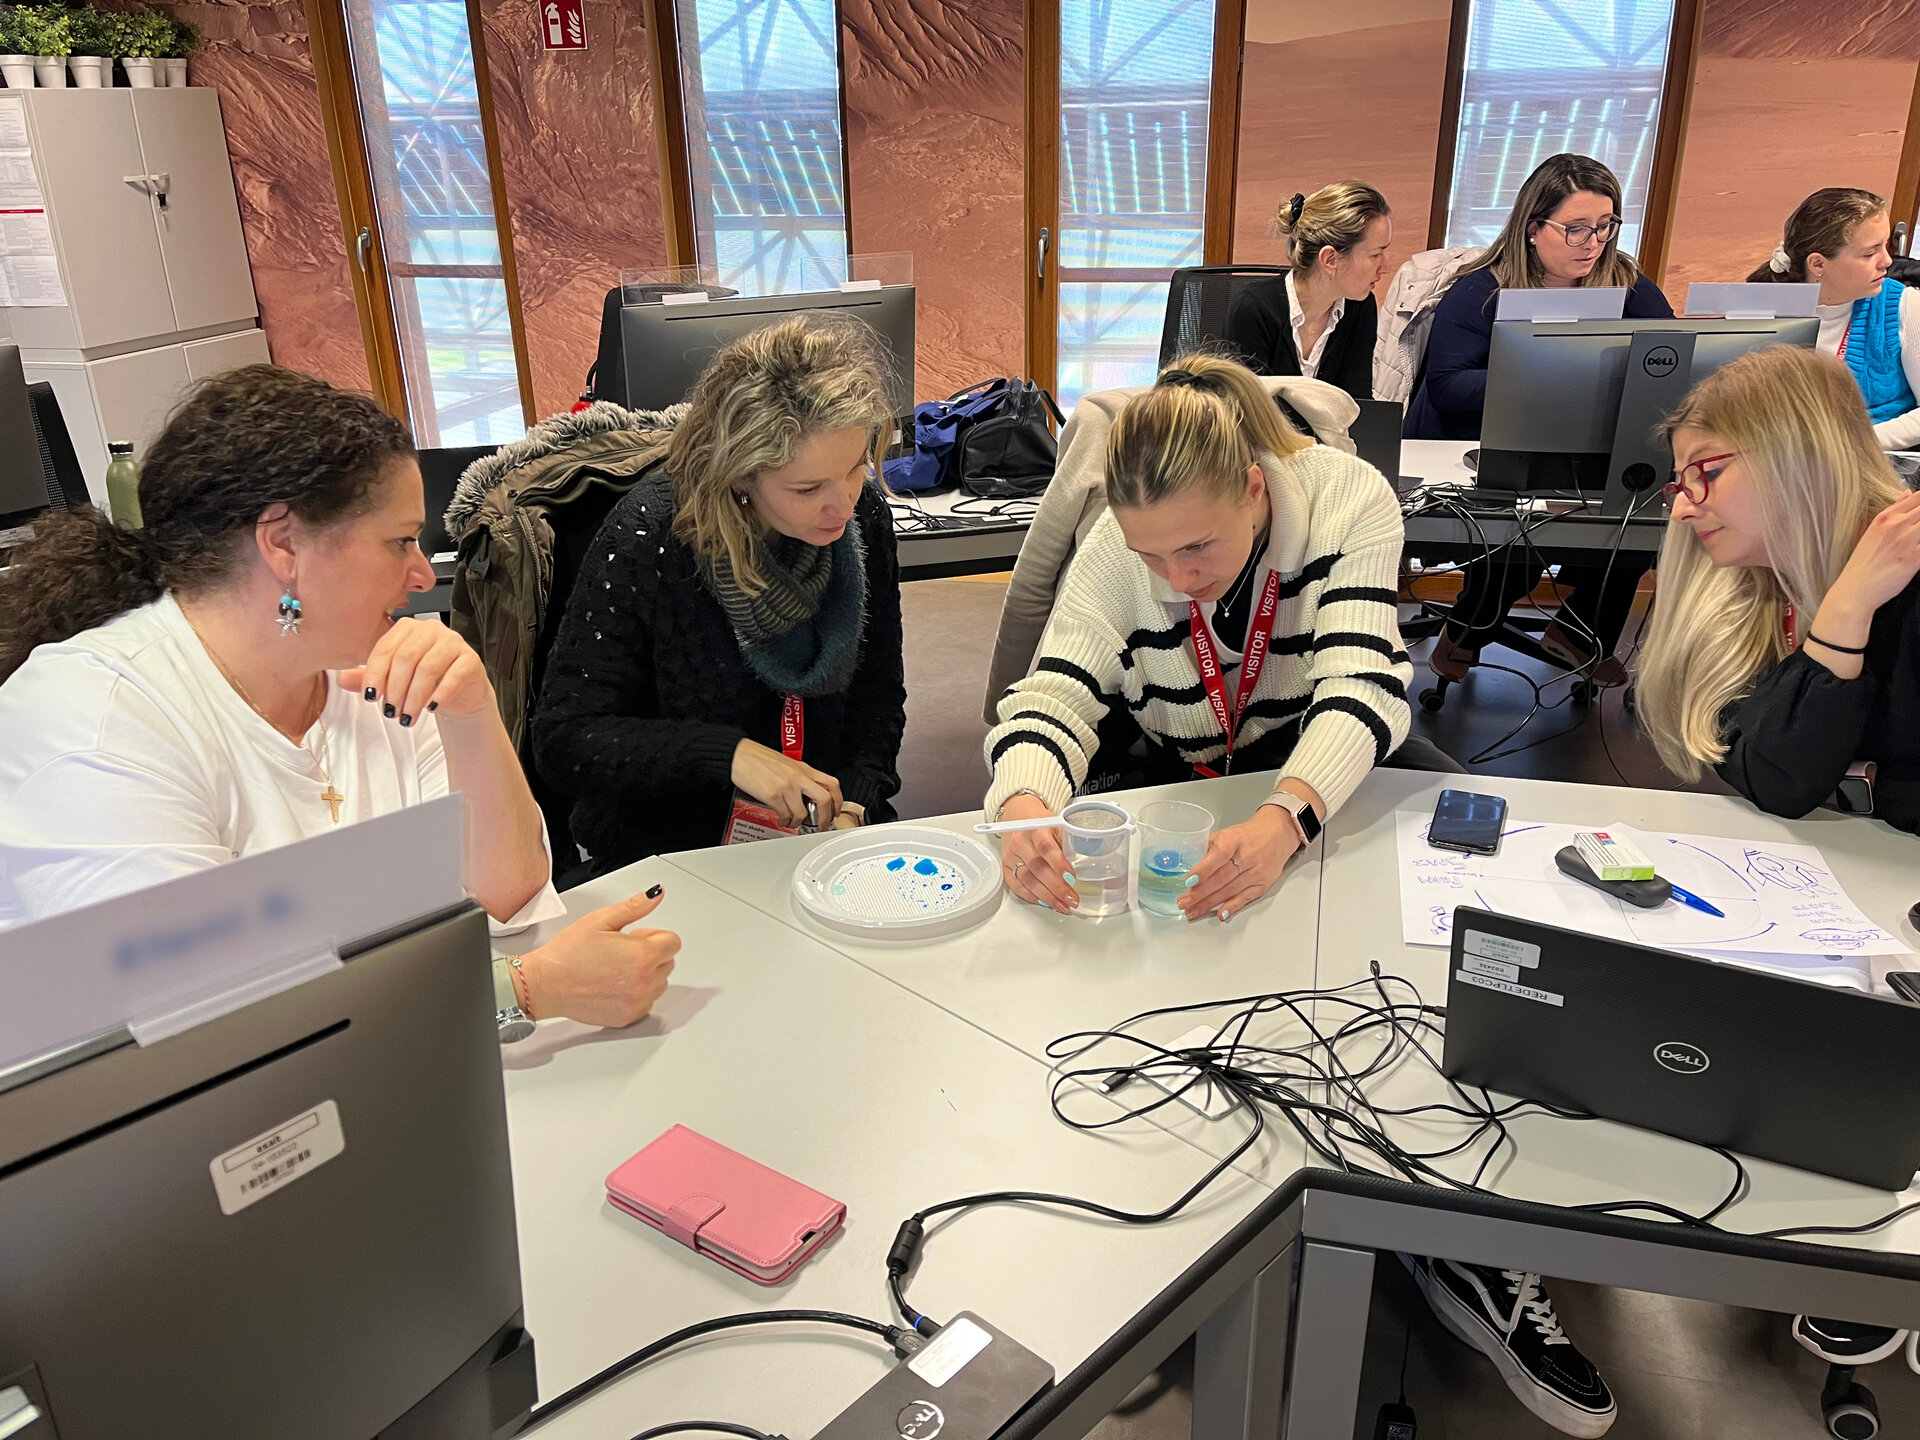 How do surface ocean currents flow? Teachers perform a experiment to visualize this phenomenon during the "Teach with Earth" workshop